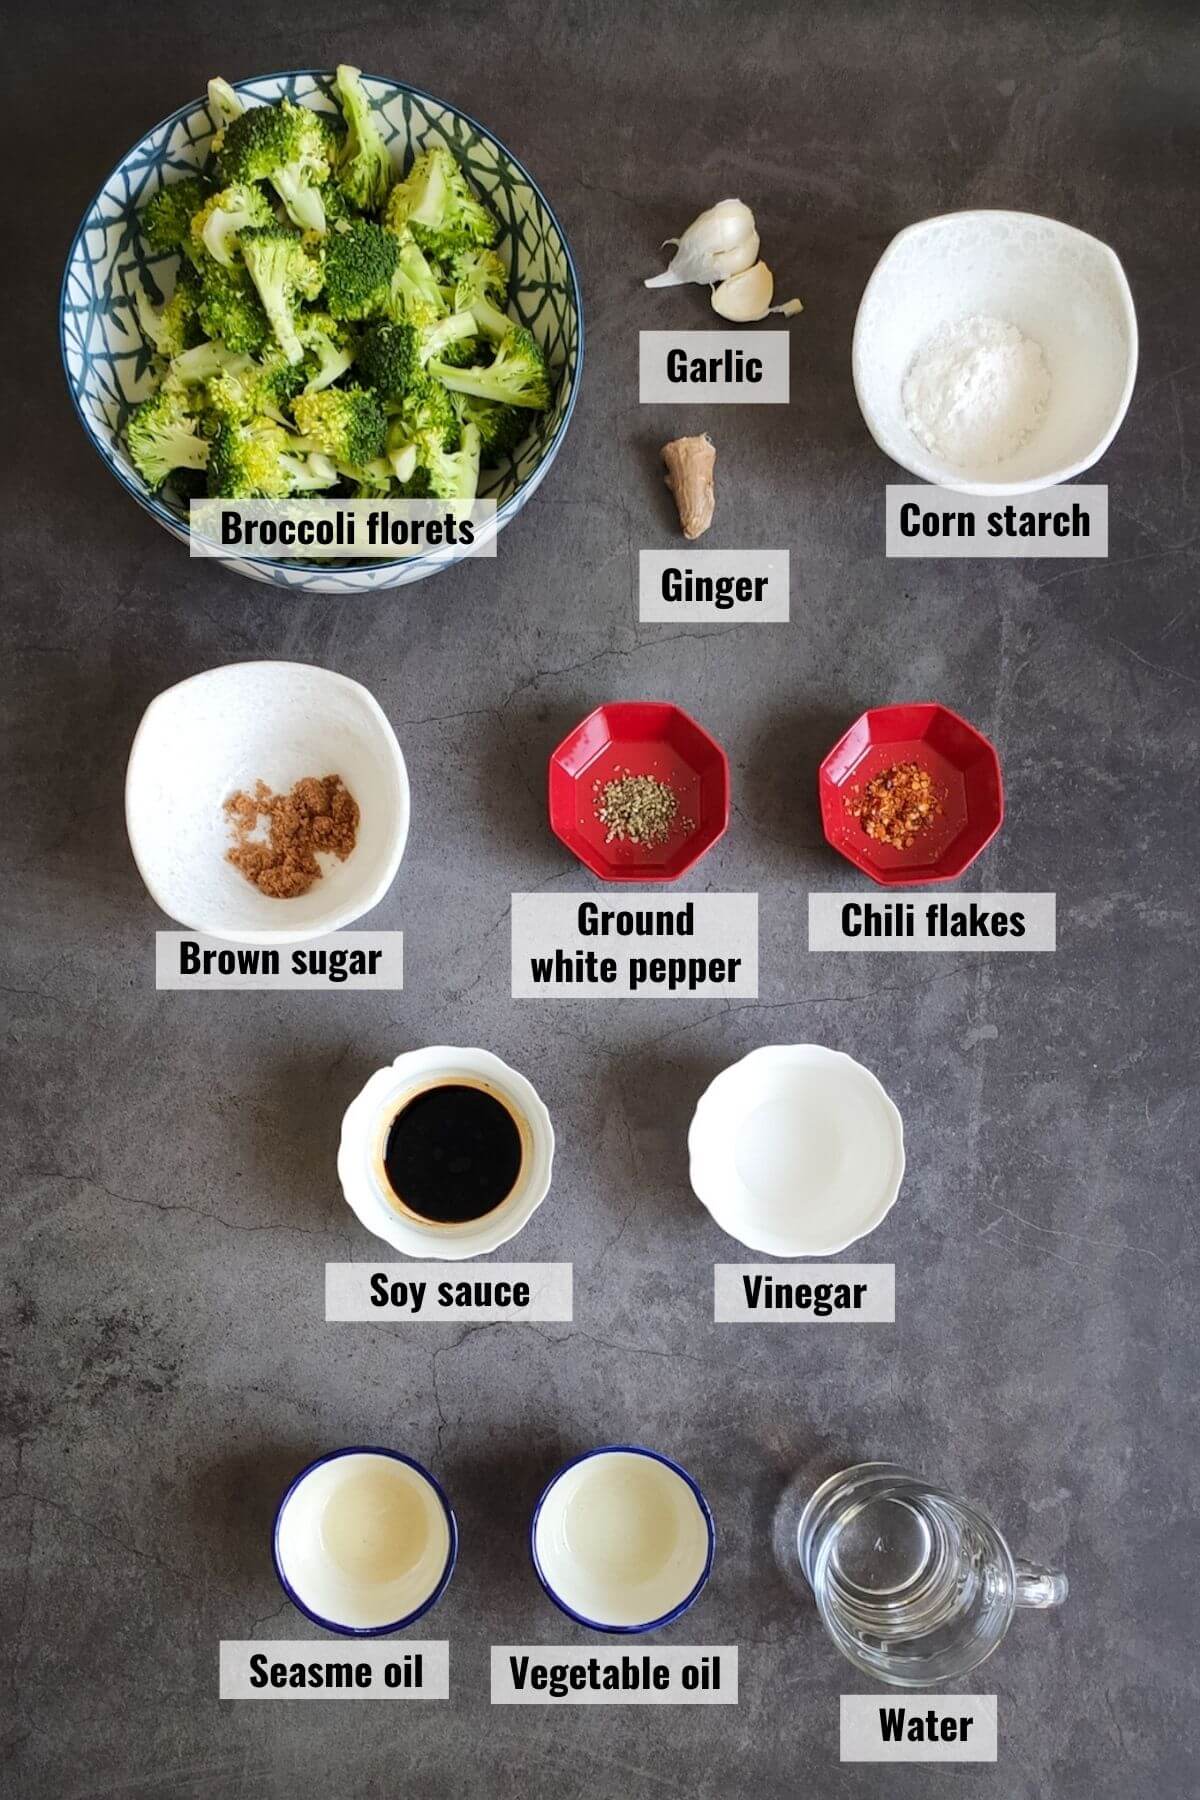 Ingredients needed to make broccoli in ginger-garlic sauce